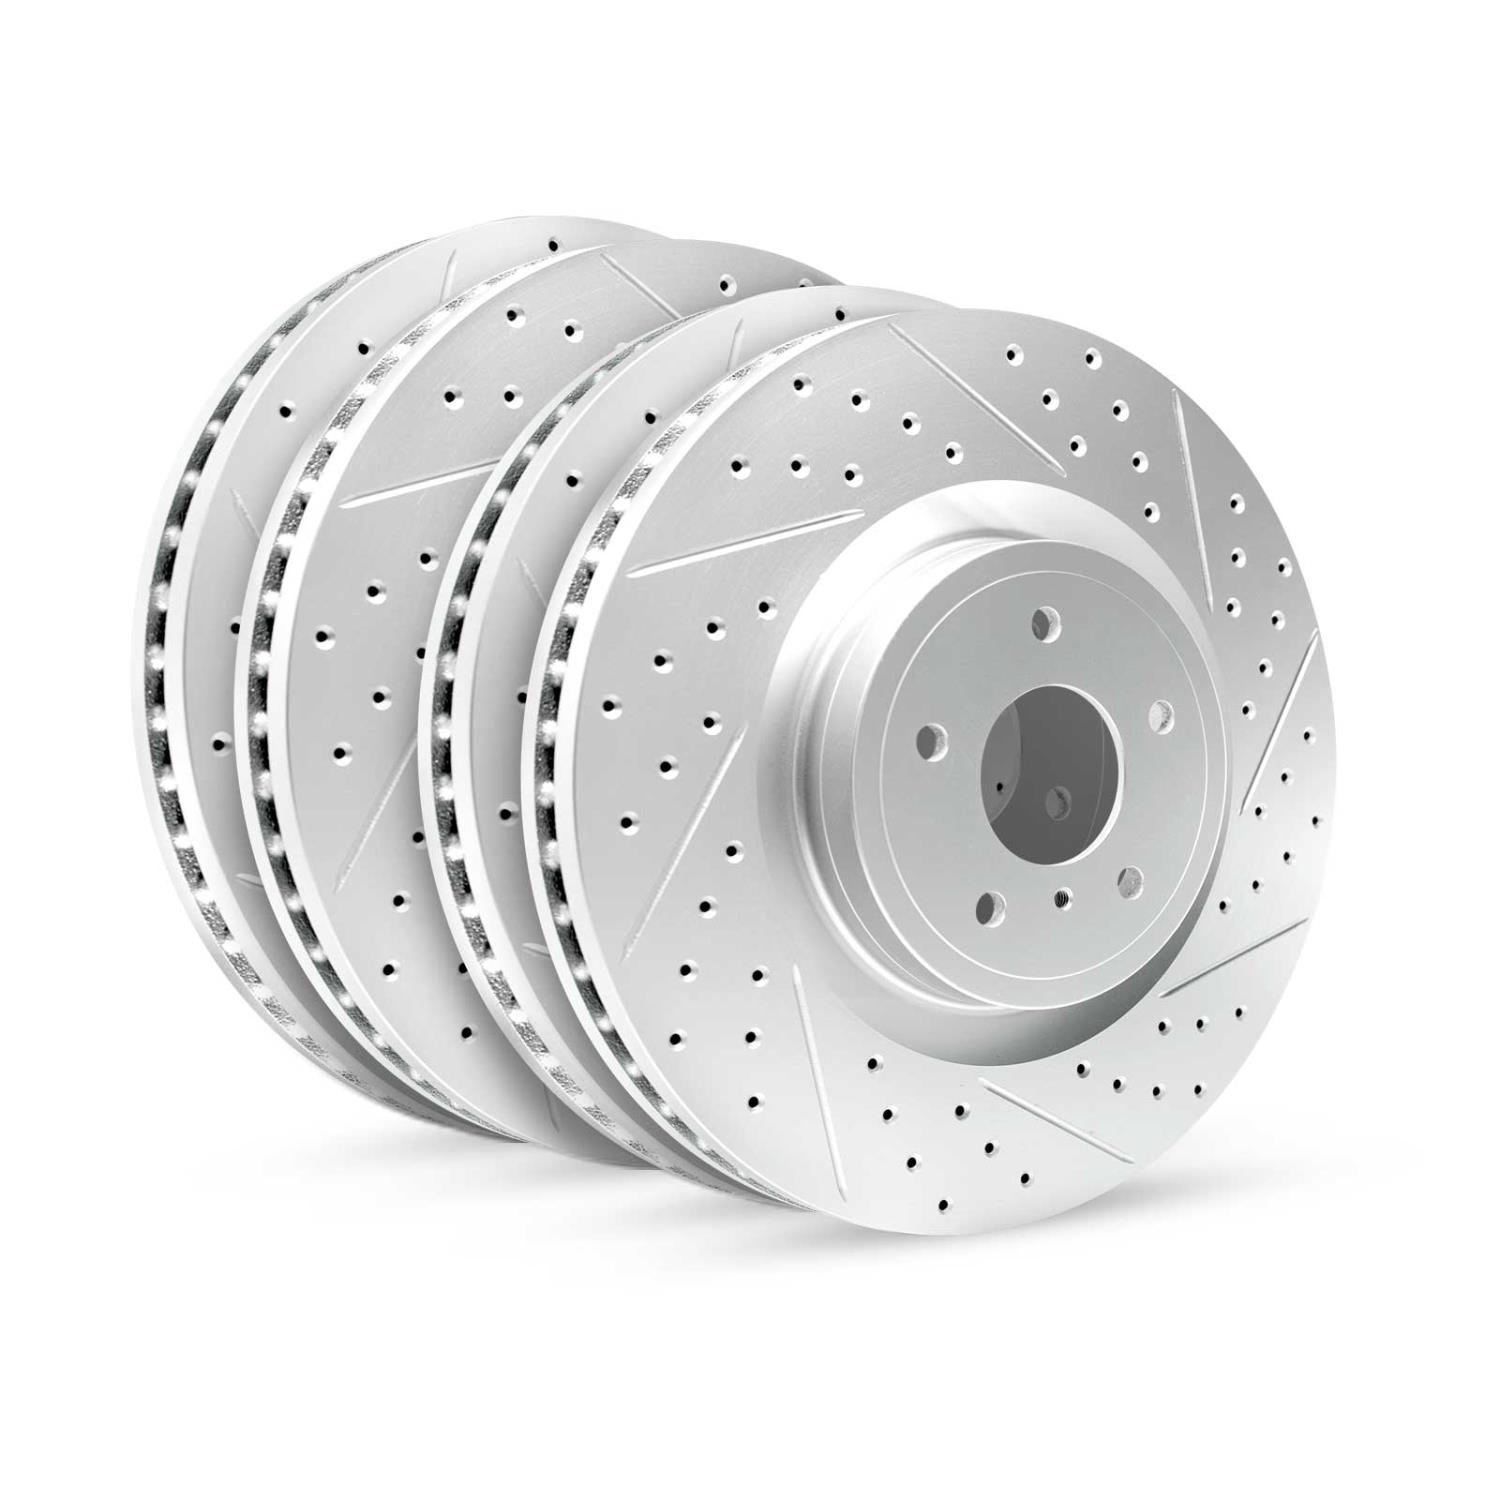 GEO-Carbon Drilled/Slotted Rotors, 2009-2019 Mopar, Position: